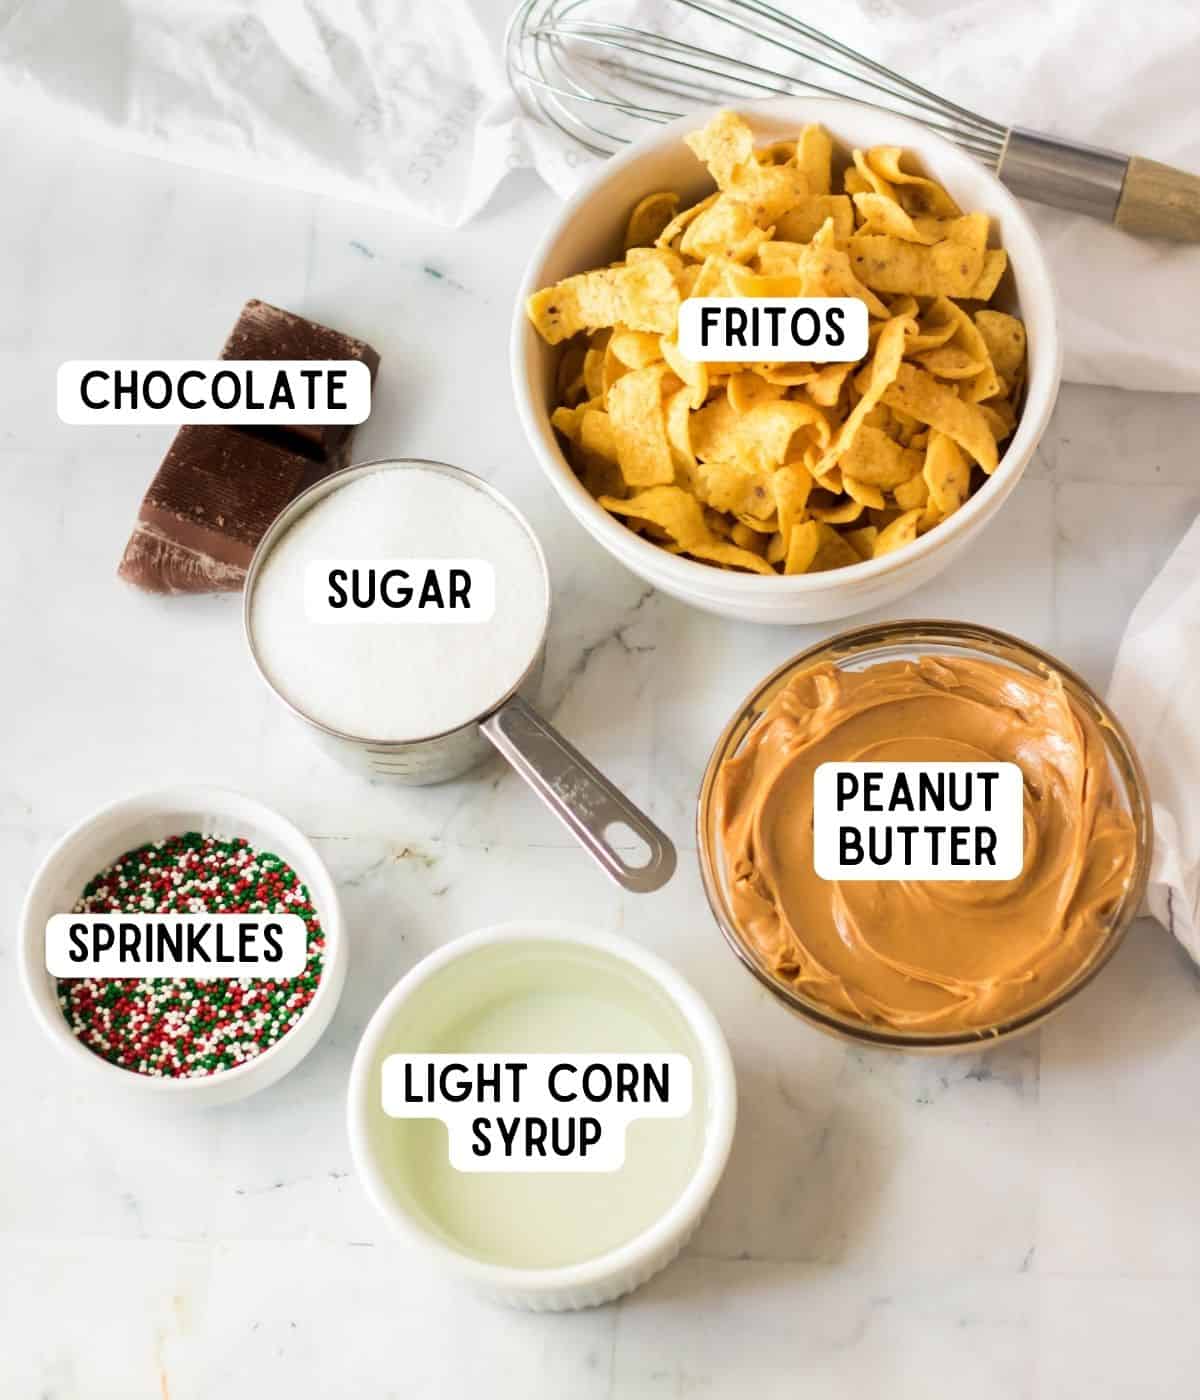 Fritos candy ingredients: chocolate almond bark, fritos, sugar, peanut butter, light corn syrup, and sprinkles.